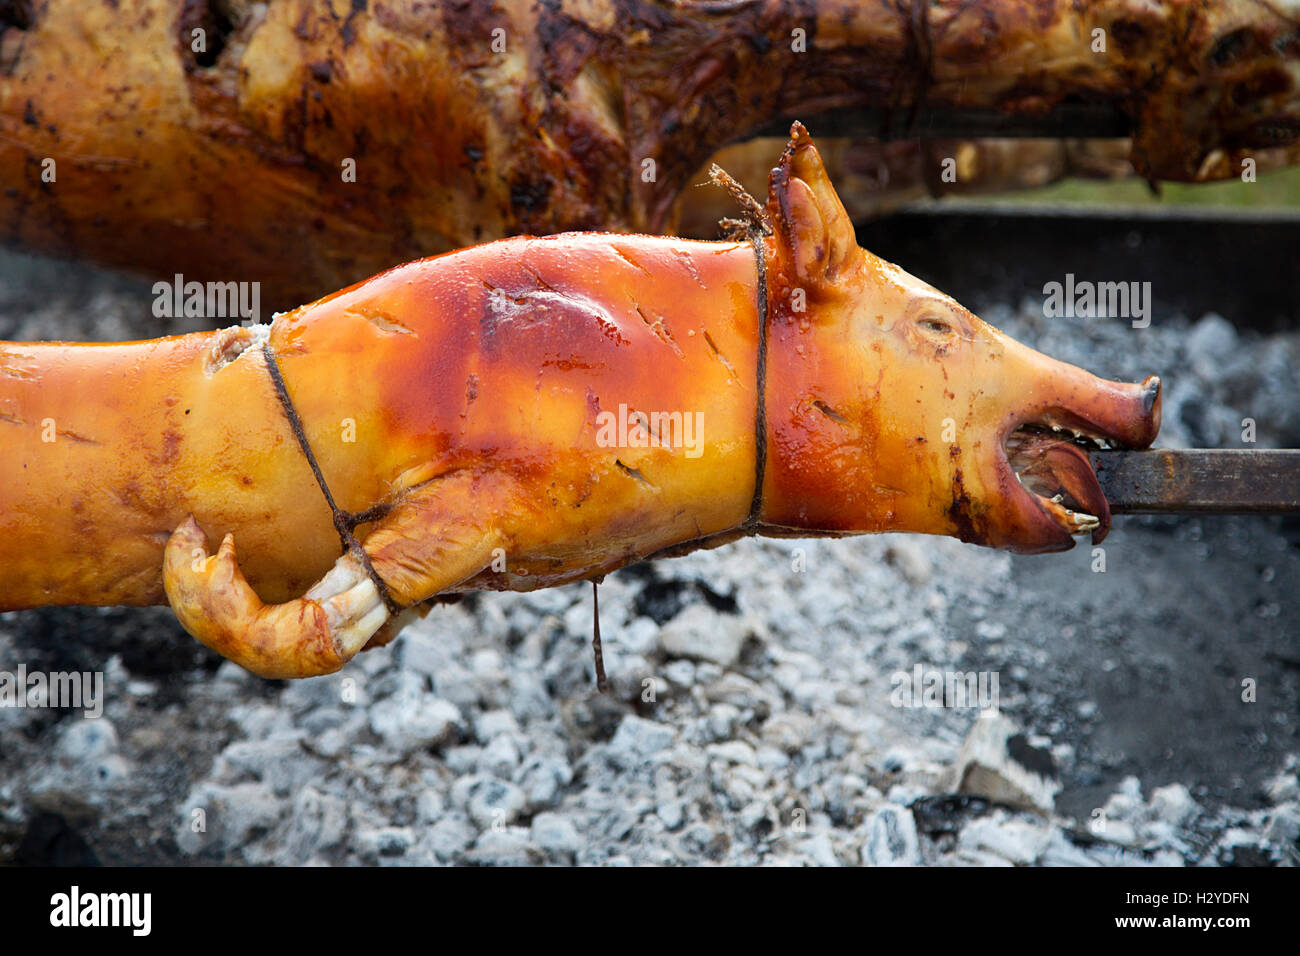 View at roasted pig on a spit Stock Photo